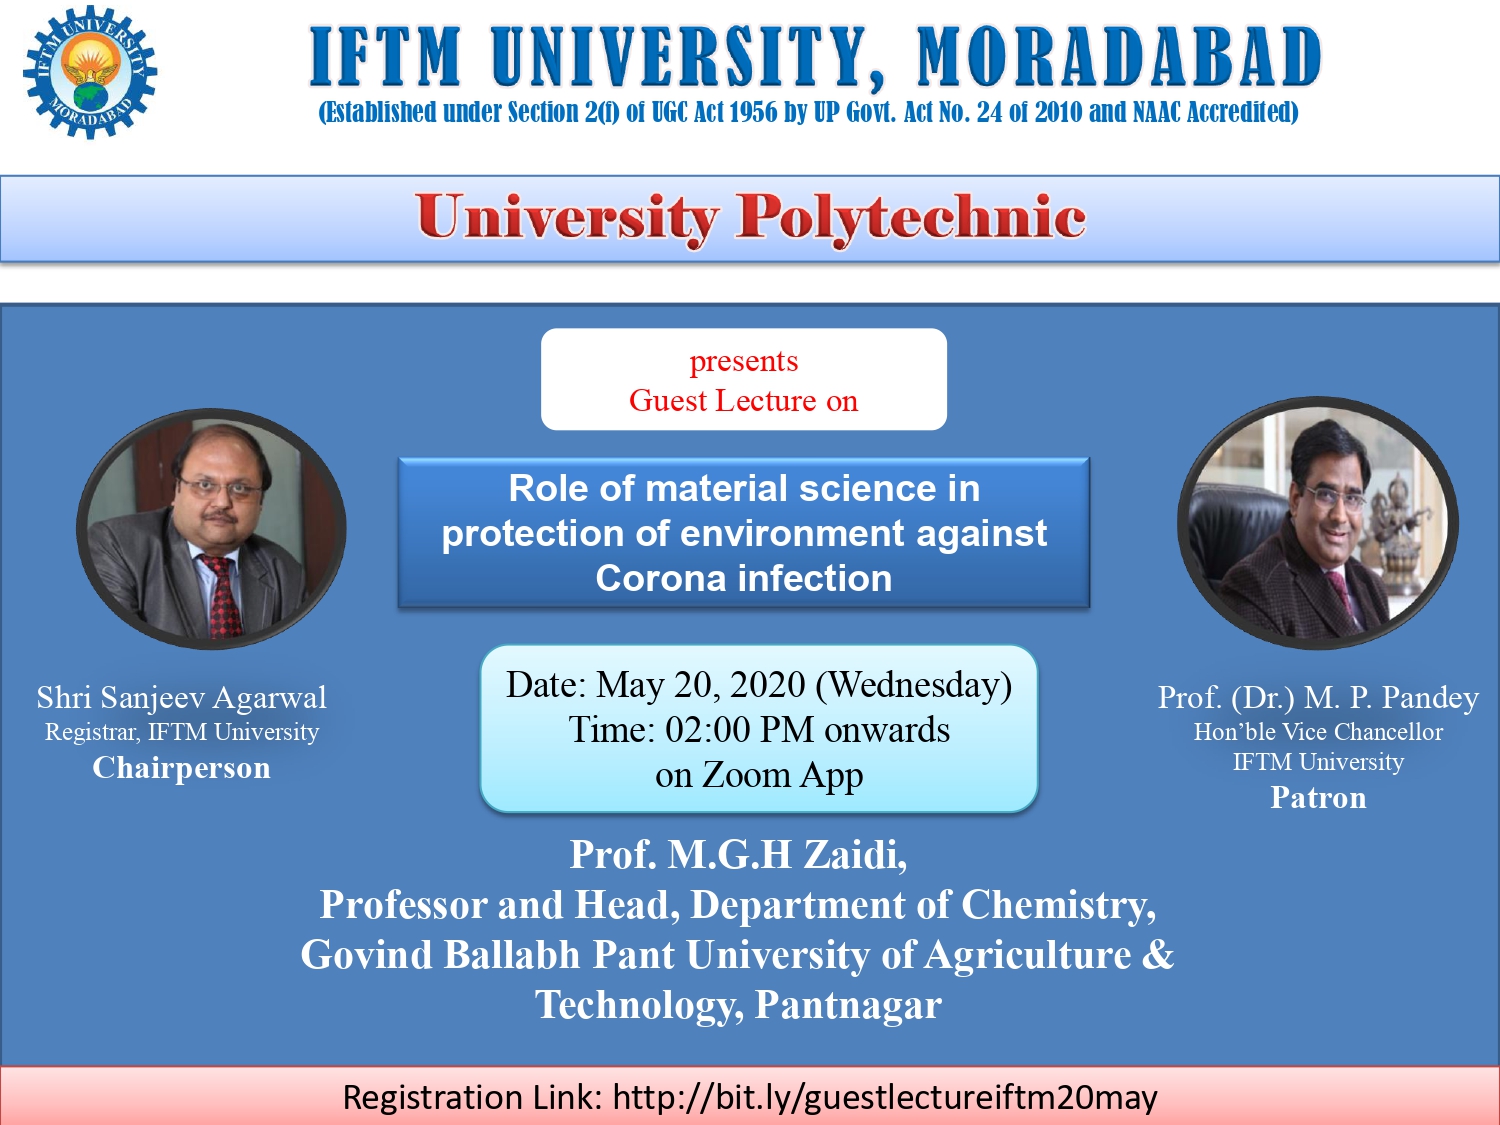 Guest Lecture on Role of material science in protection of environment against Corona infection